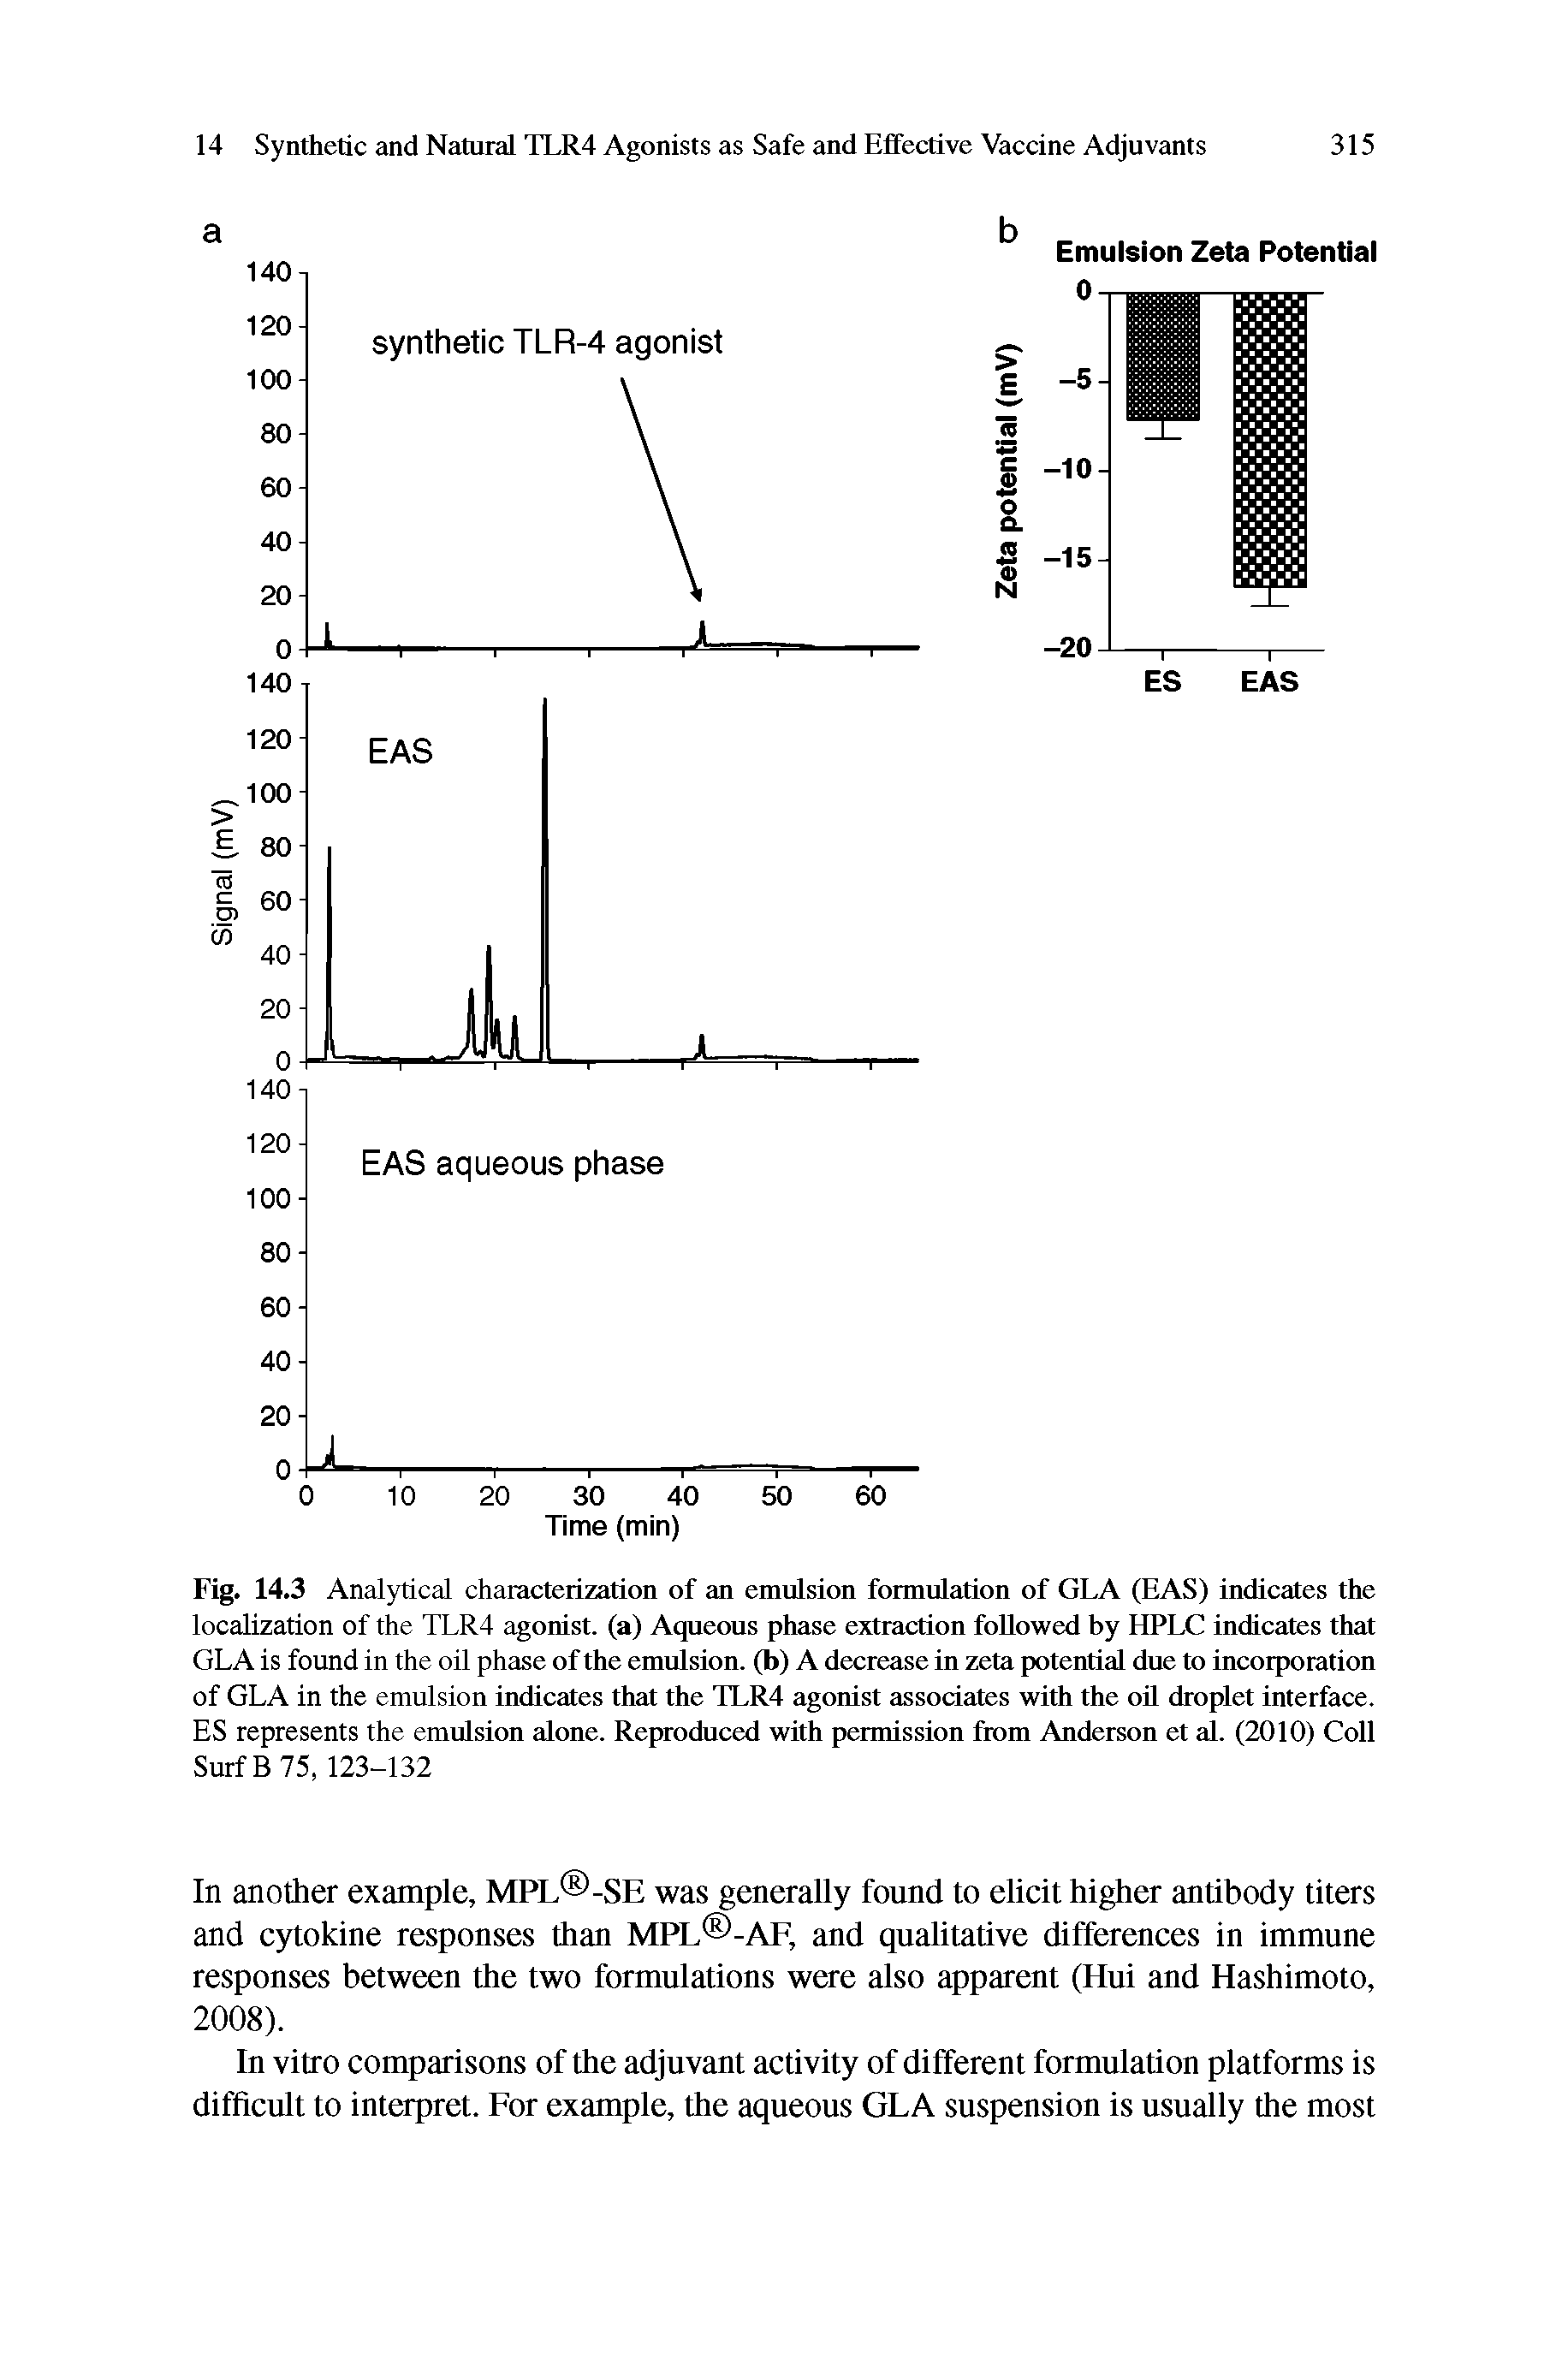 Fig. 14.3 Analytical characterization of an emulsion formulation of GLA (EAS) indicates the localization of the TLR4 agonist, (a) Aqueous phase extraction followed by HPLC indicates that GLA is found in the oil phase of the emulsion, (b) A decrease in zeta potential due to incorporation of GLA in the emulsion indicates that the TLR4 agonist associates with the oil droplet interface. ES represents the emulsion alone. Reproduced with permission from Anderson et al. (2010) Coll Surf B 75, 123-132...